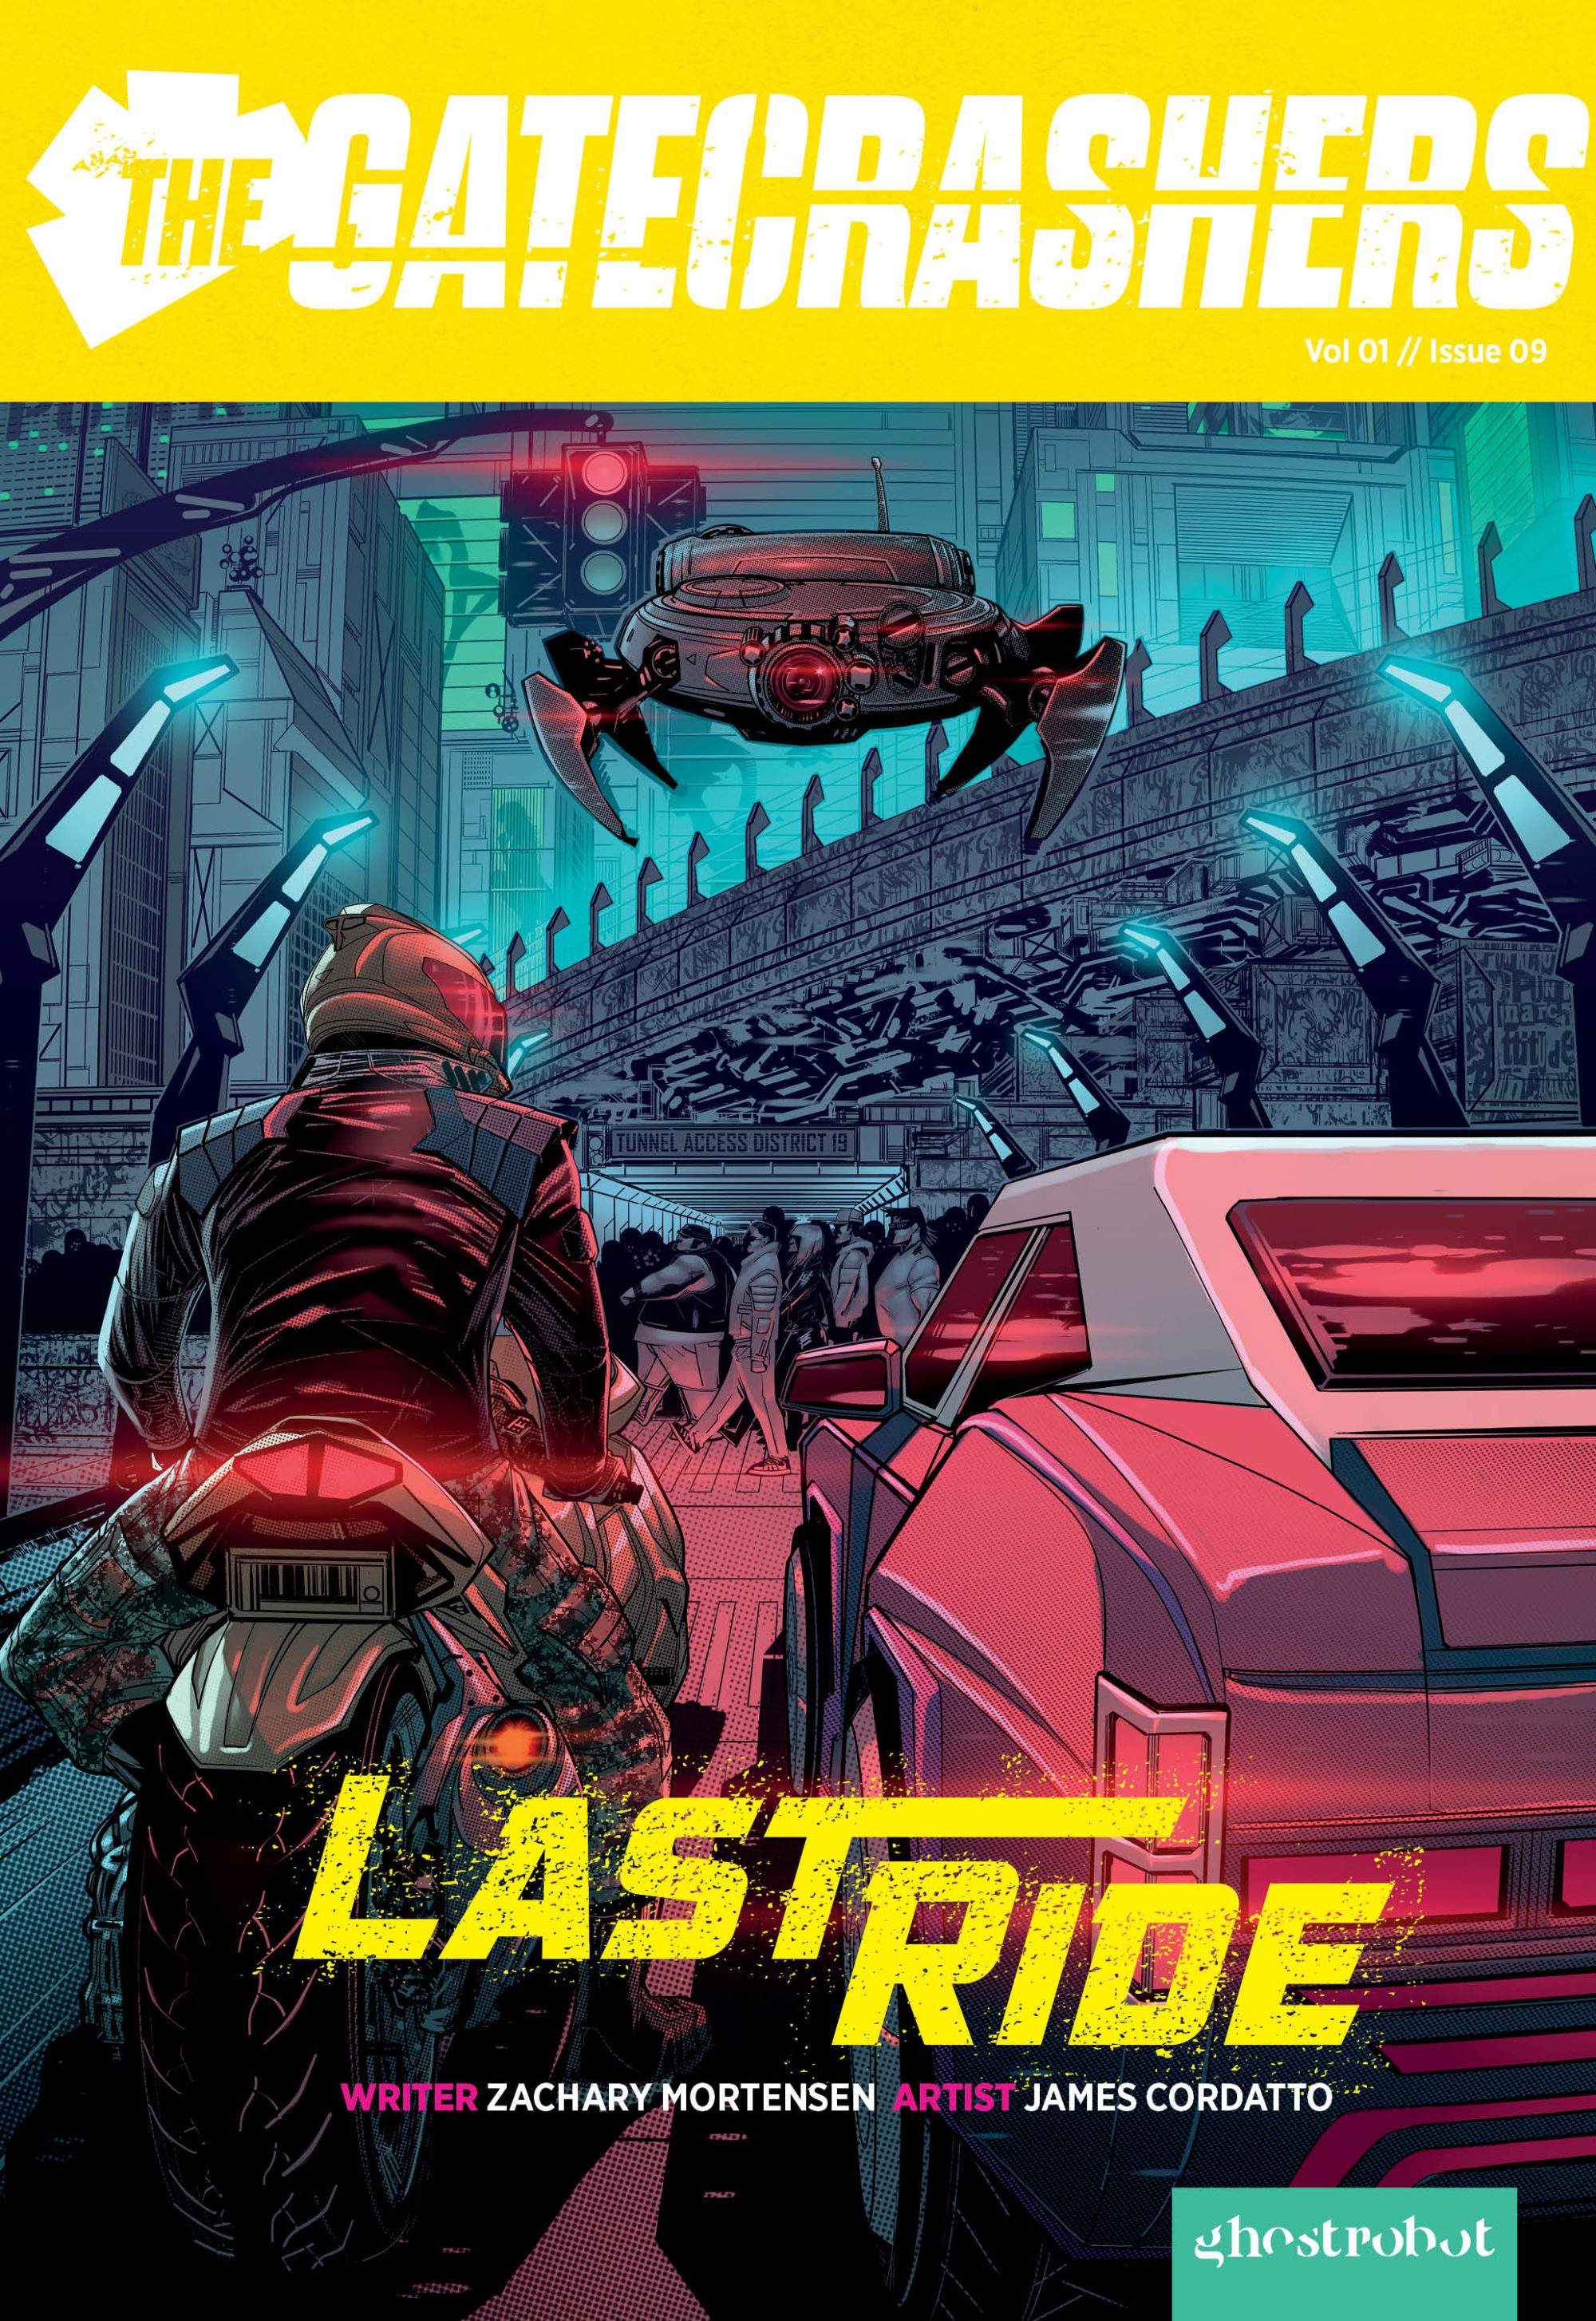 The Gatecrashers Issue 09 Last Ride Cover